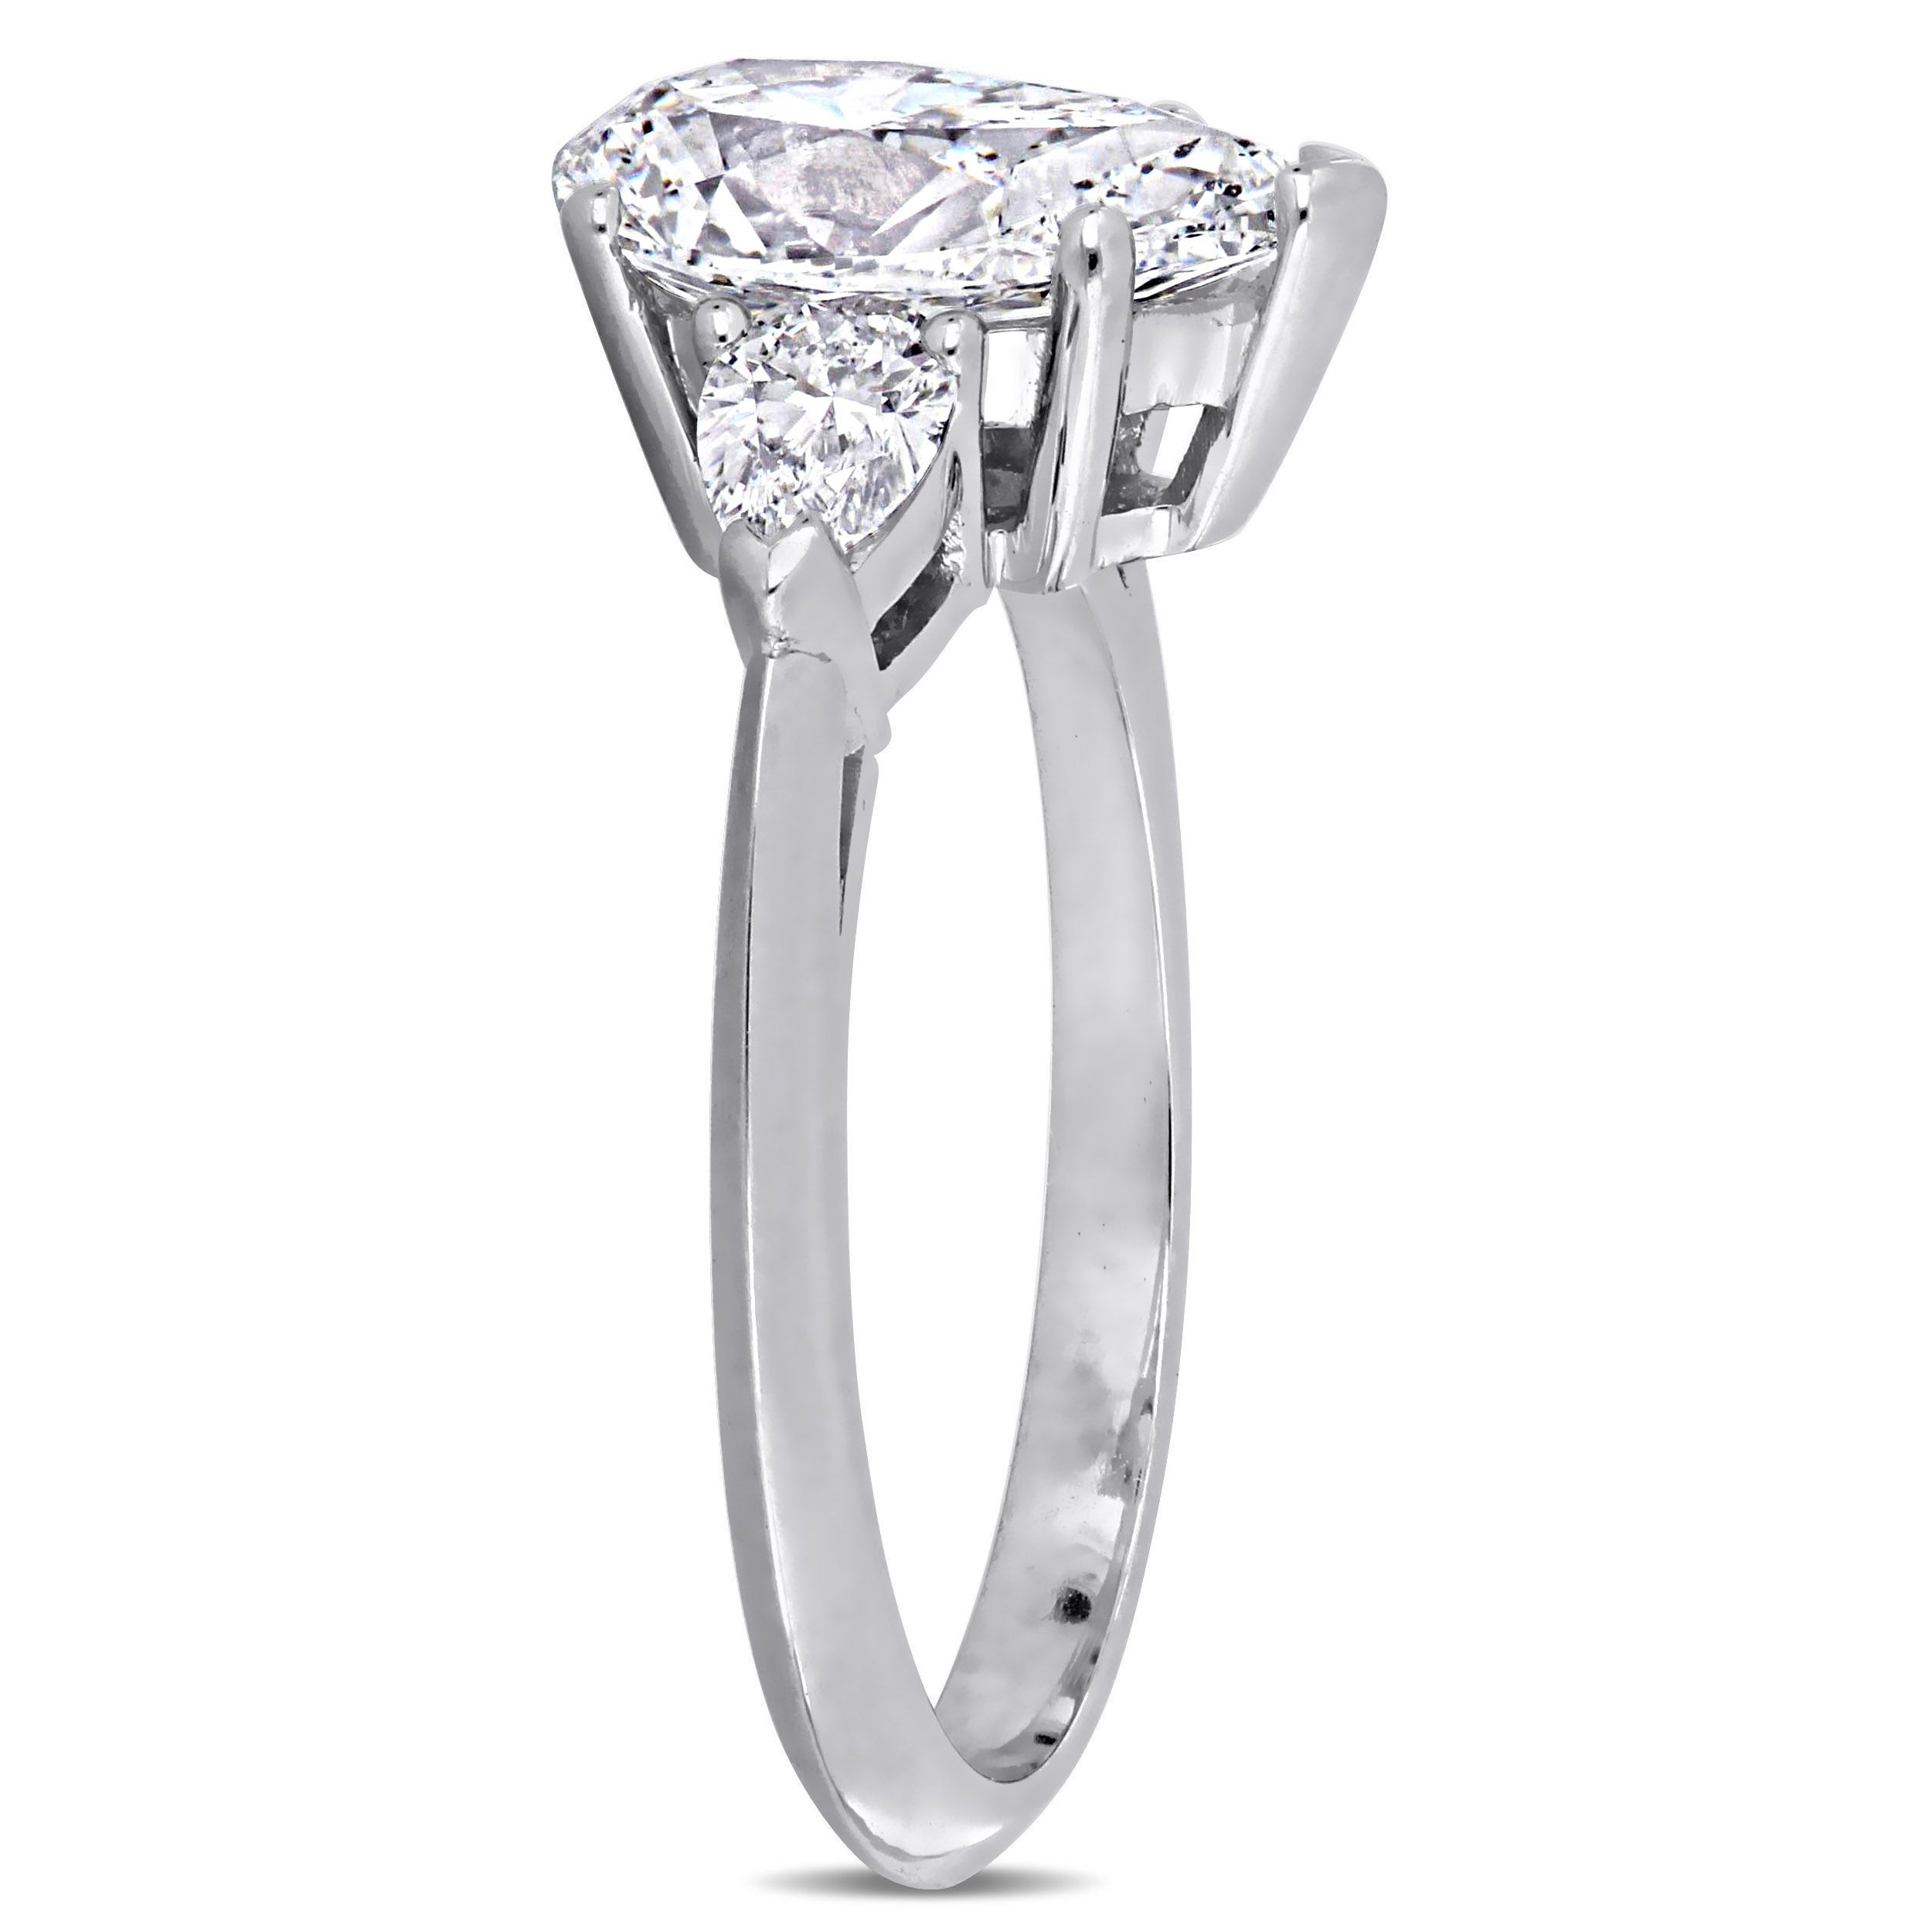 2 5/8 CT TW Diamond Engagement Ring in 18k White Gold